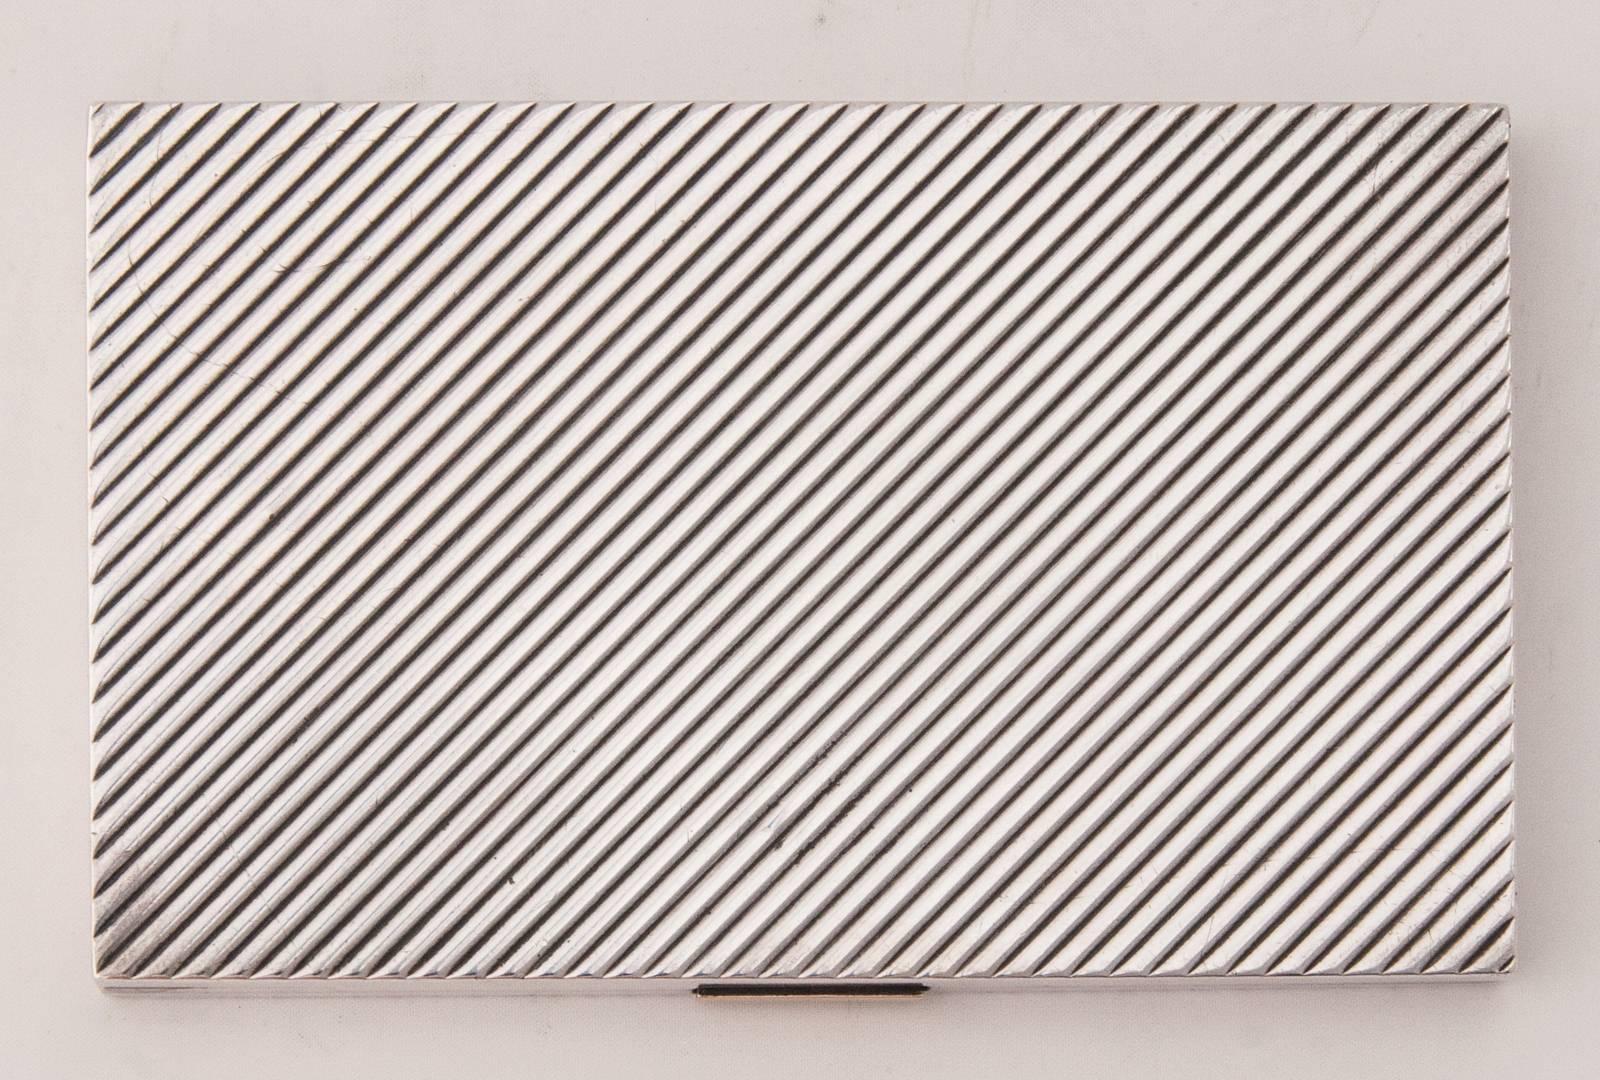 Solid silver and gold modernist cigarette case with Hermès retailer mark Paris, France, circa 1940.